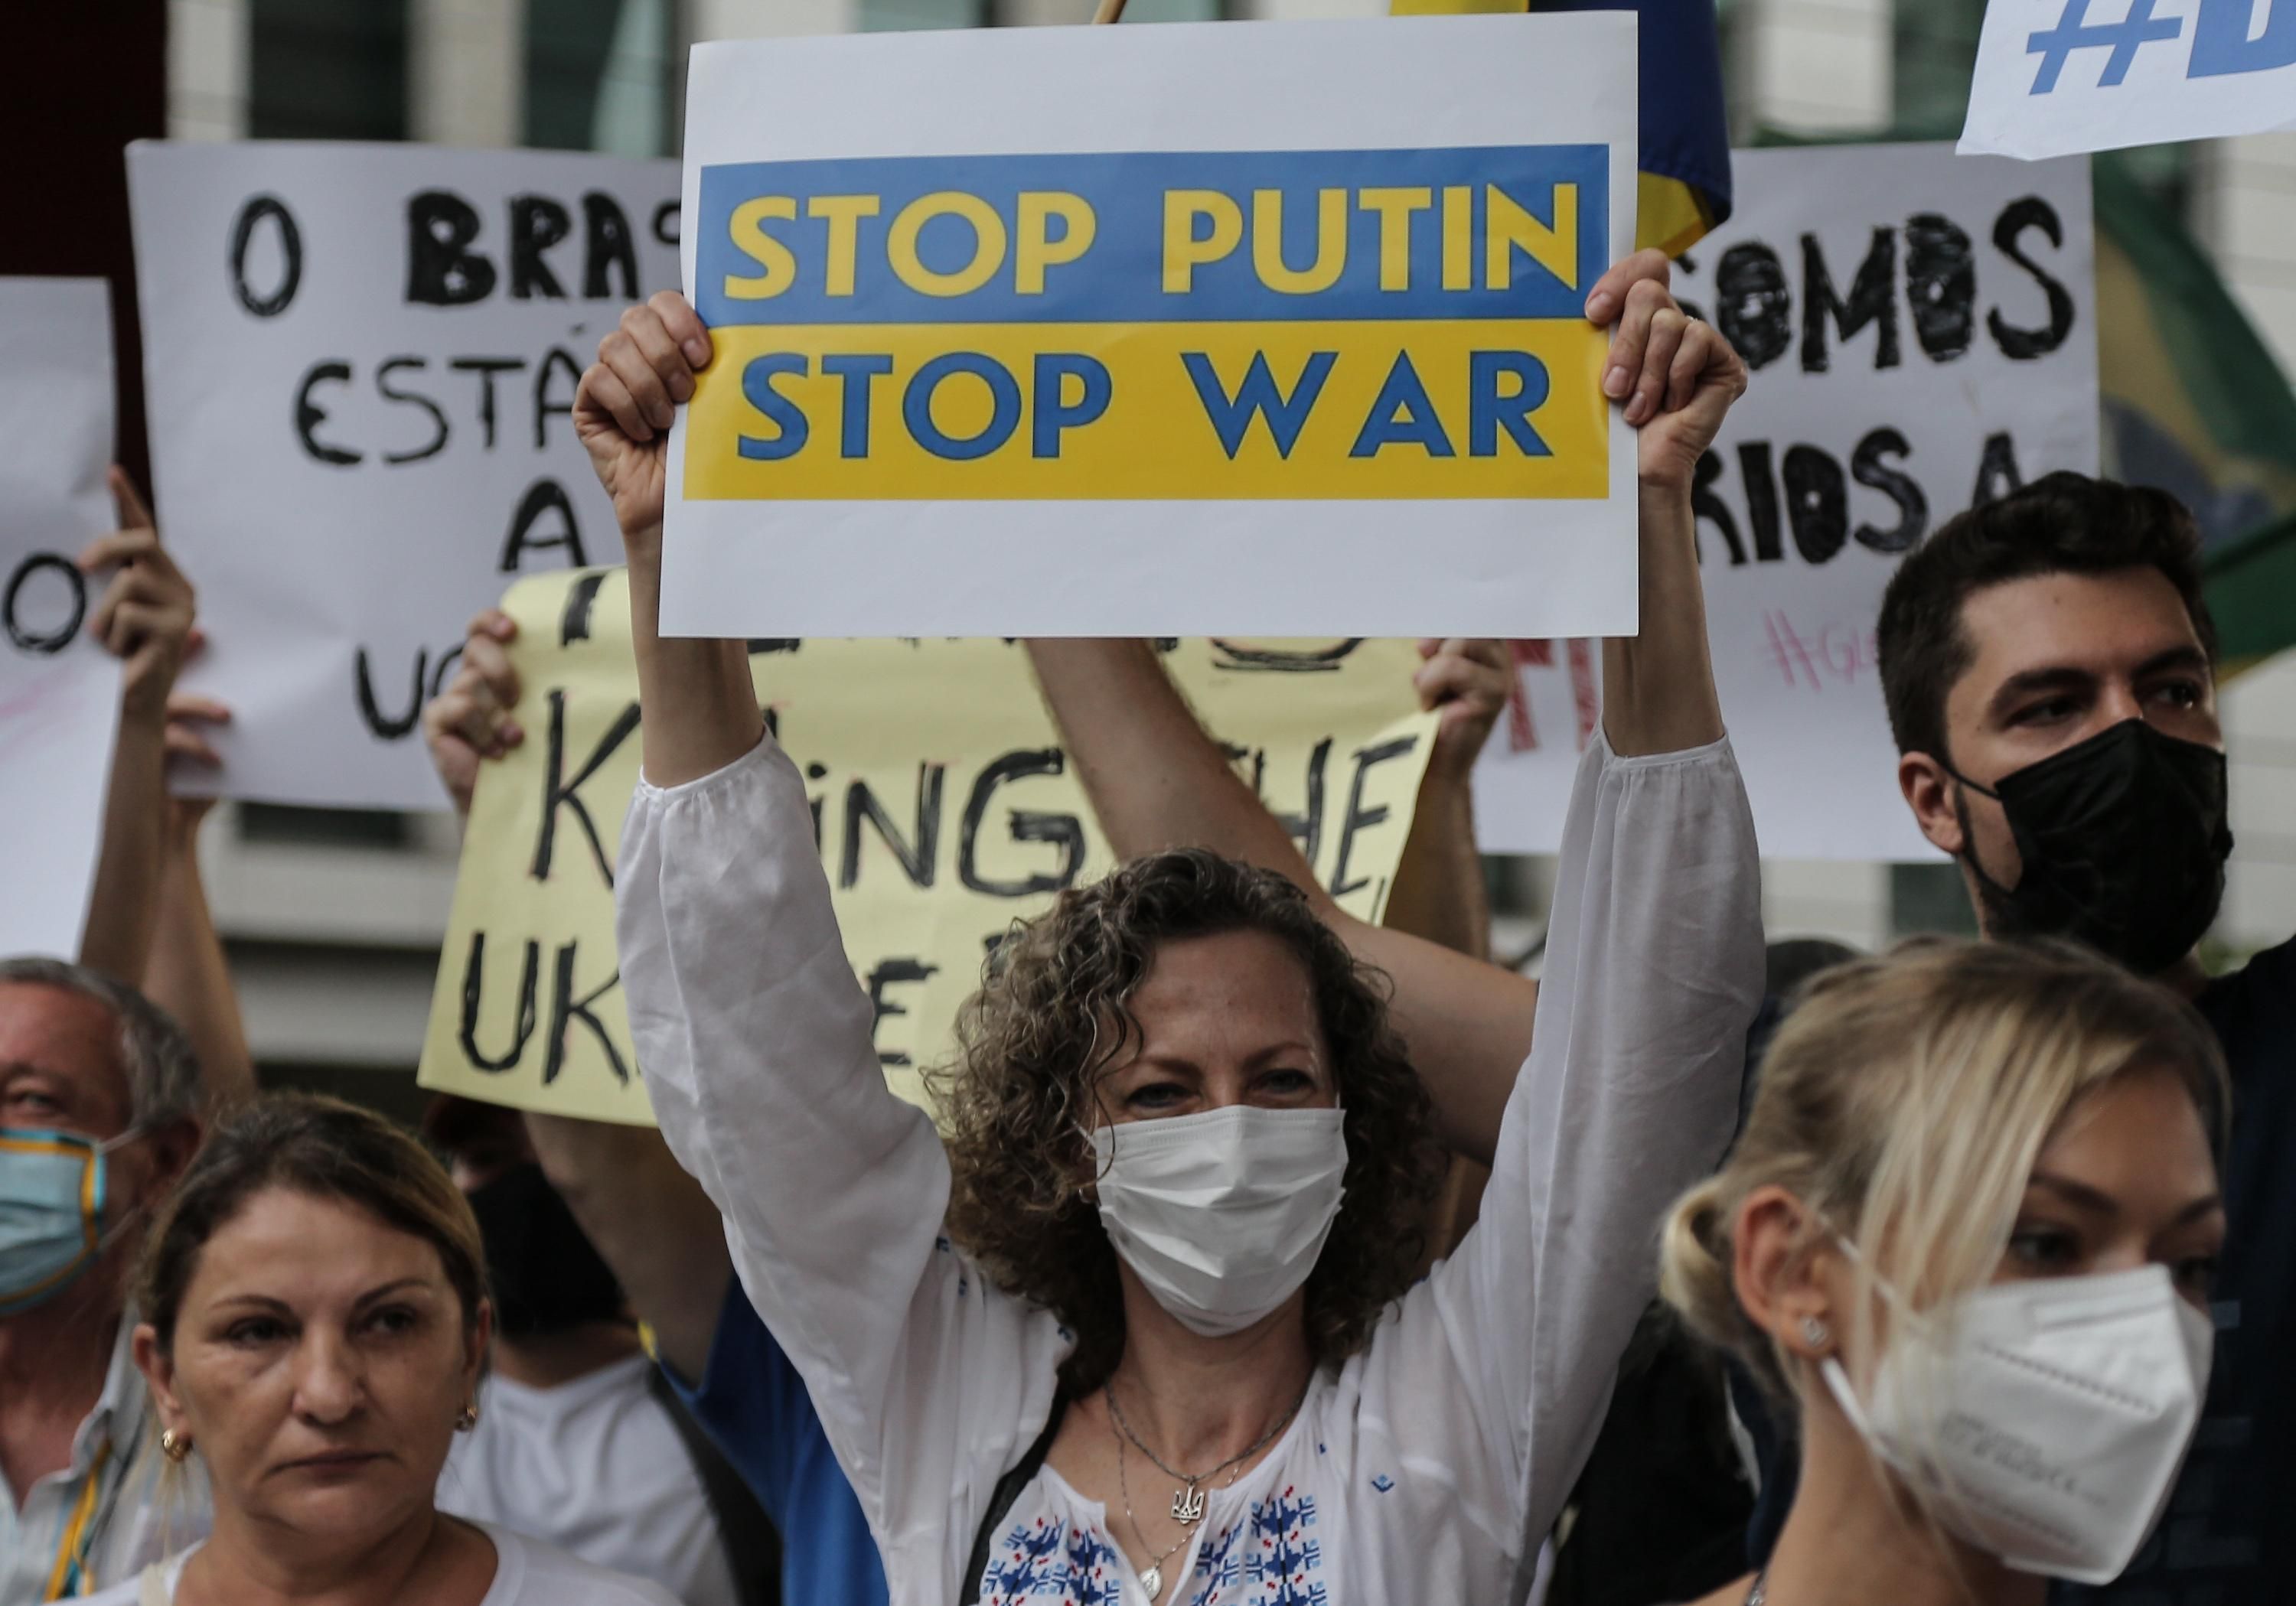 People hold banners during a demonstration in support of Ukraine at Paulista avenue in Sao Paulo, Brazil on March 1, 2022.